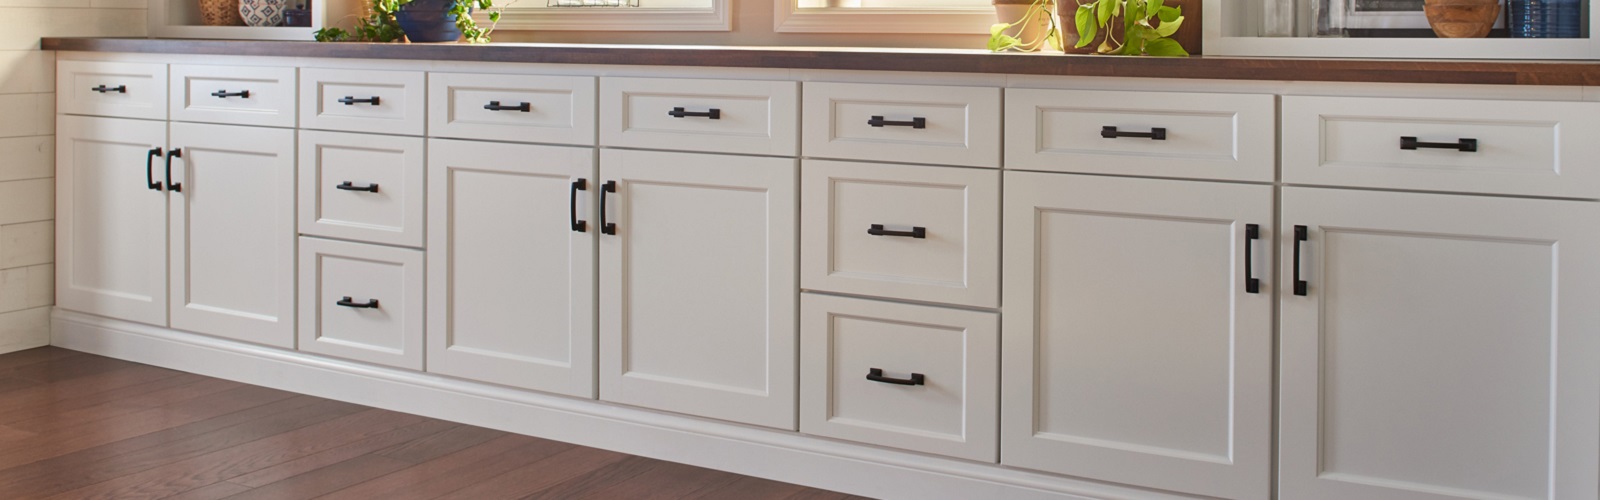 How To Choose The Best Size Pulls For Your Kitchen Cabinets Doors 